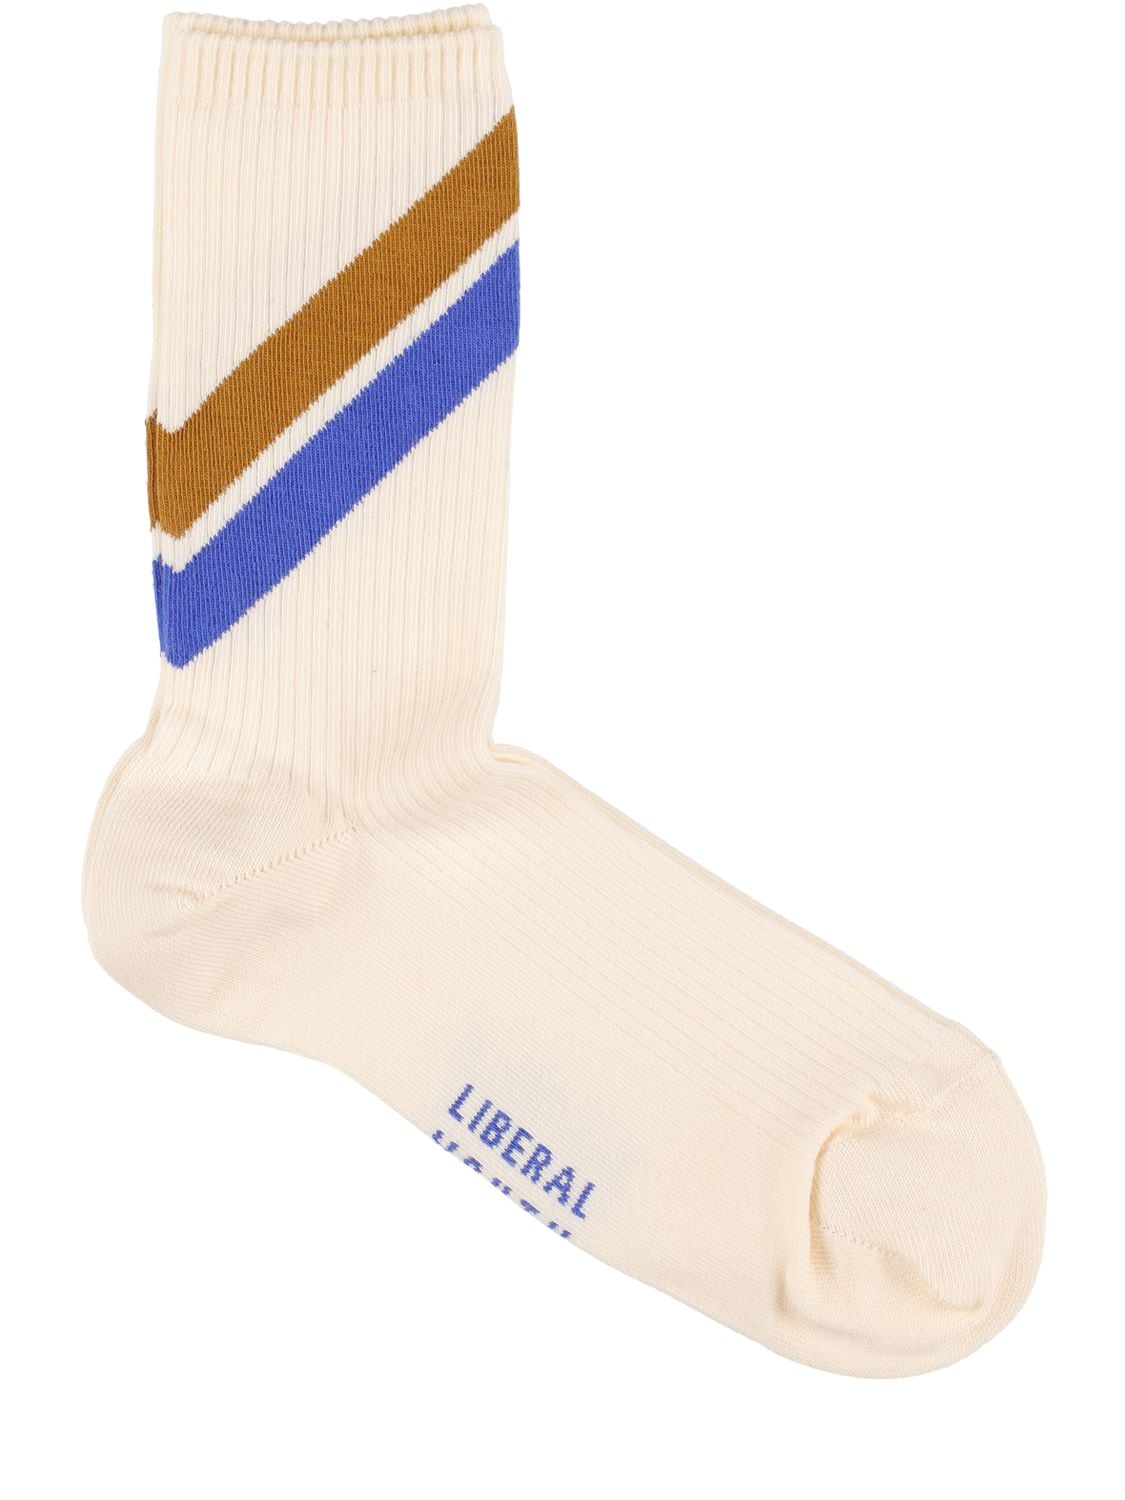 LIBERAL YOUTH MINISTRY Striped Cotton Blend Soccer Socks